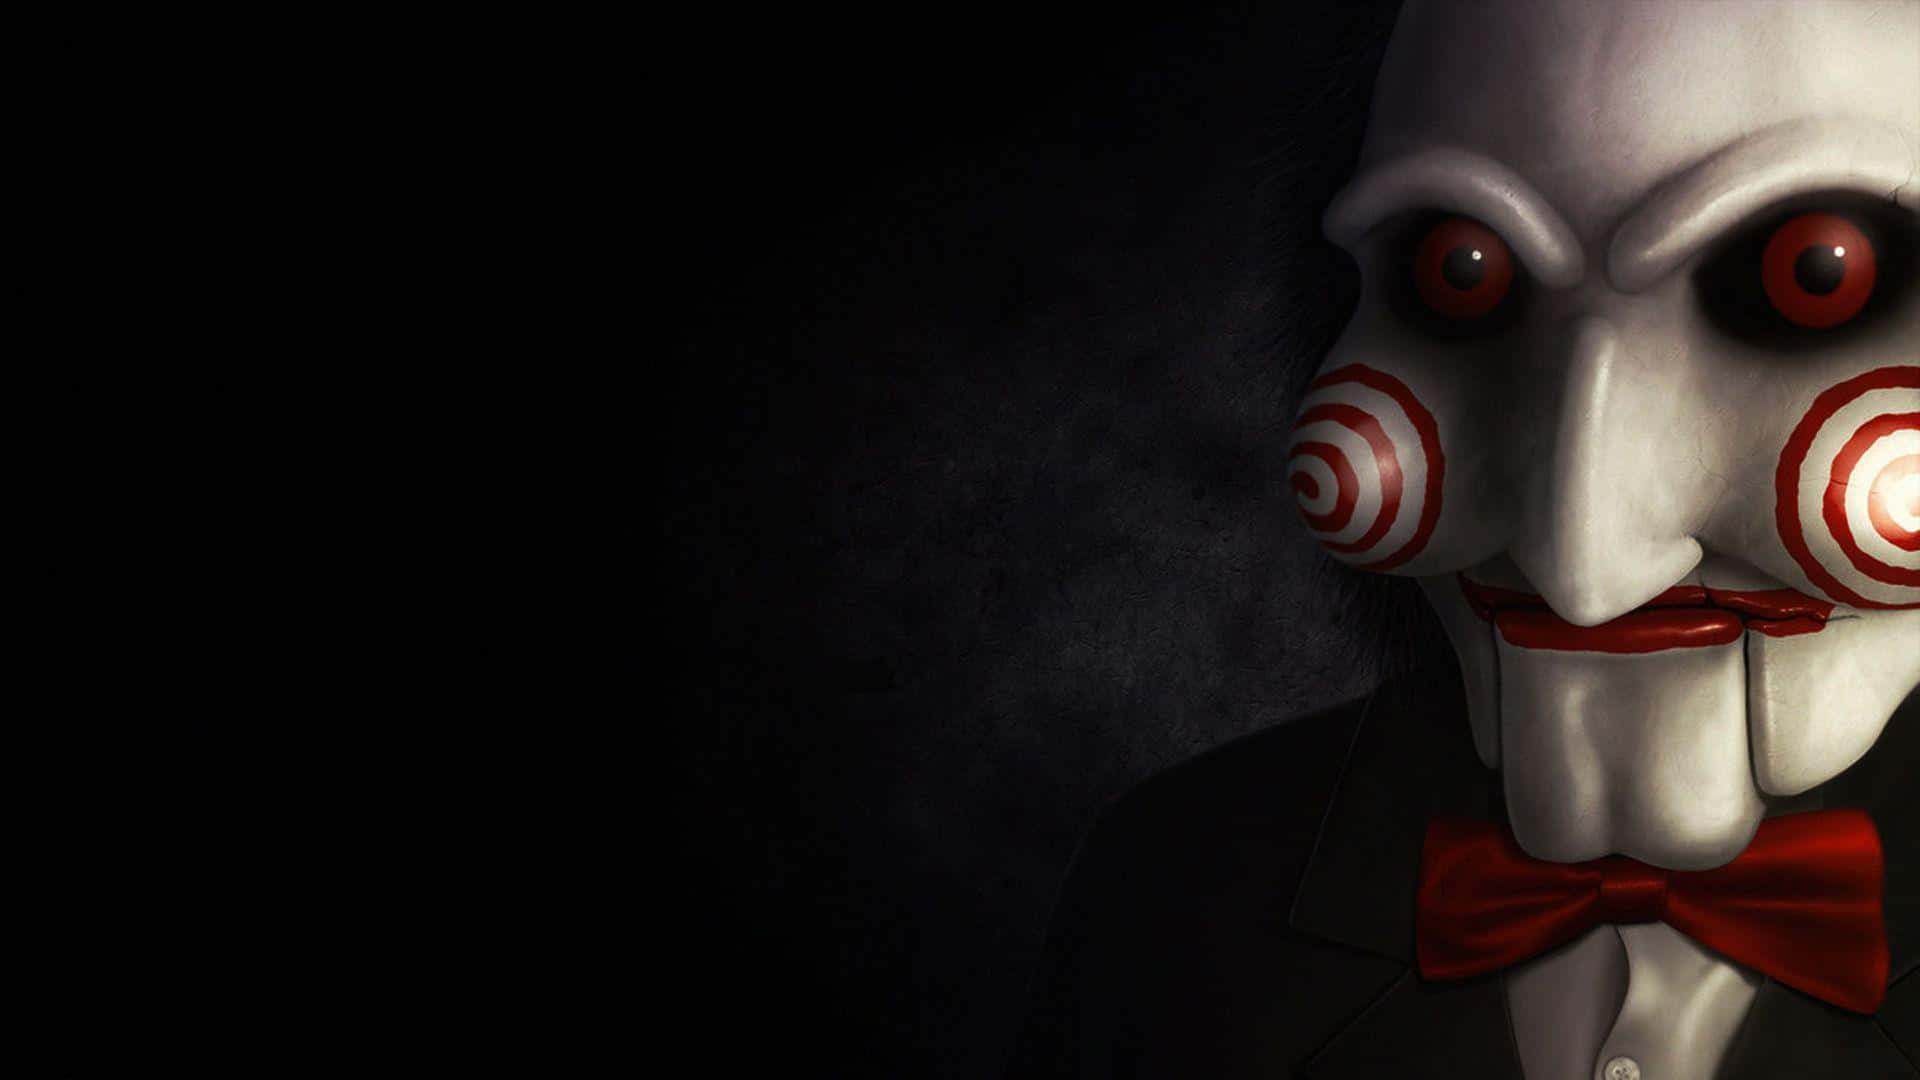 A Creepy Clown With A Bow Tie And A Dark Background Wallpaper